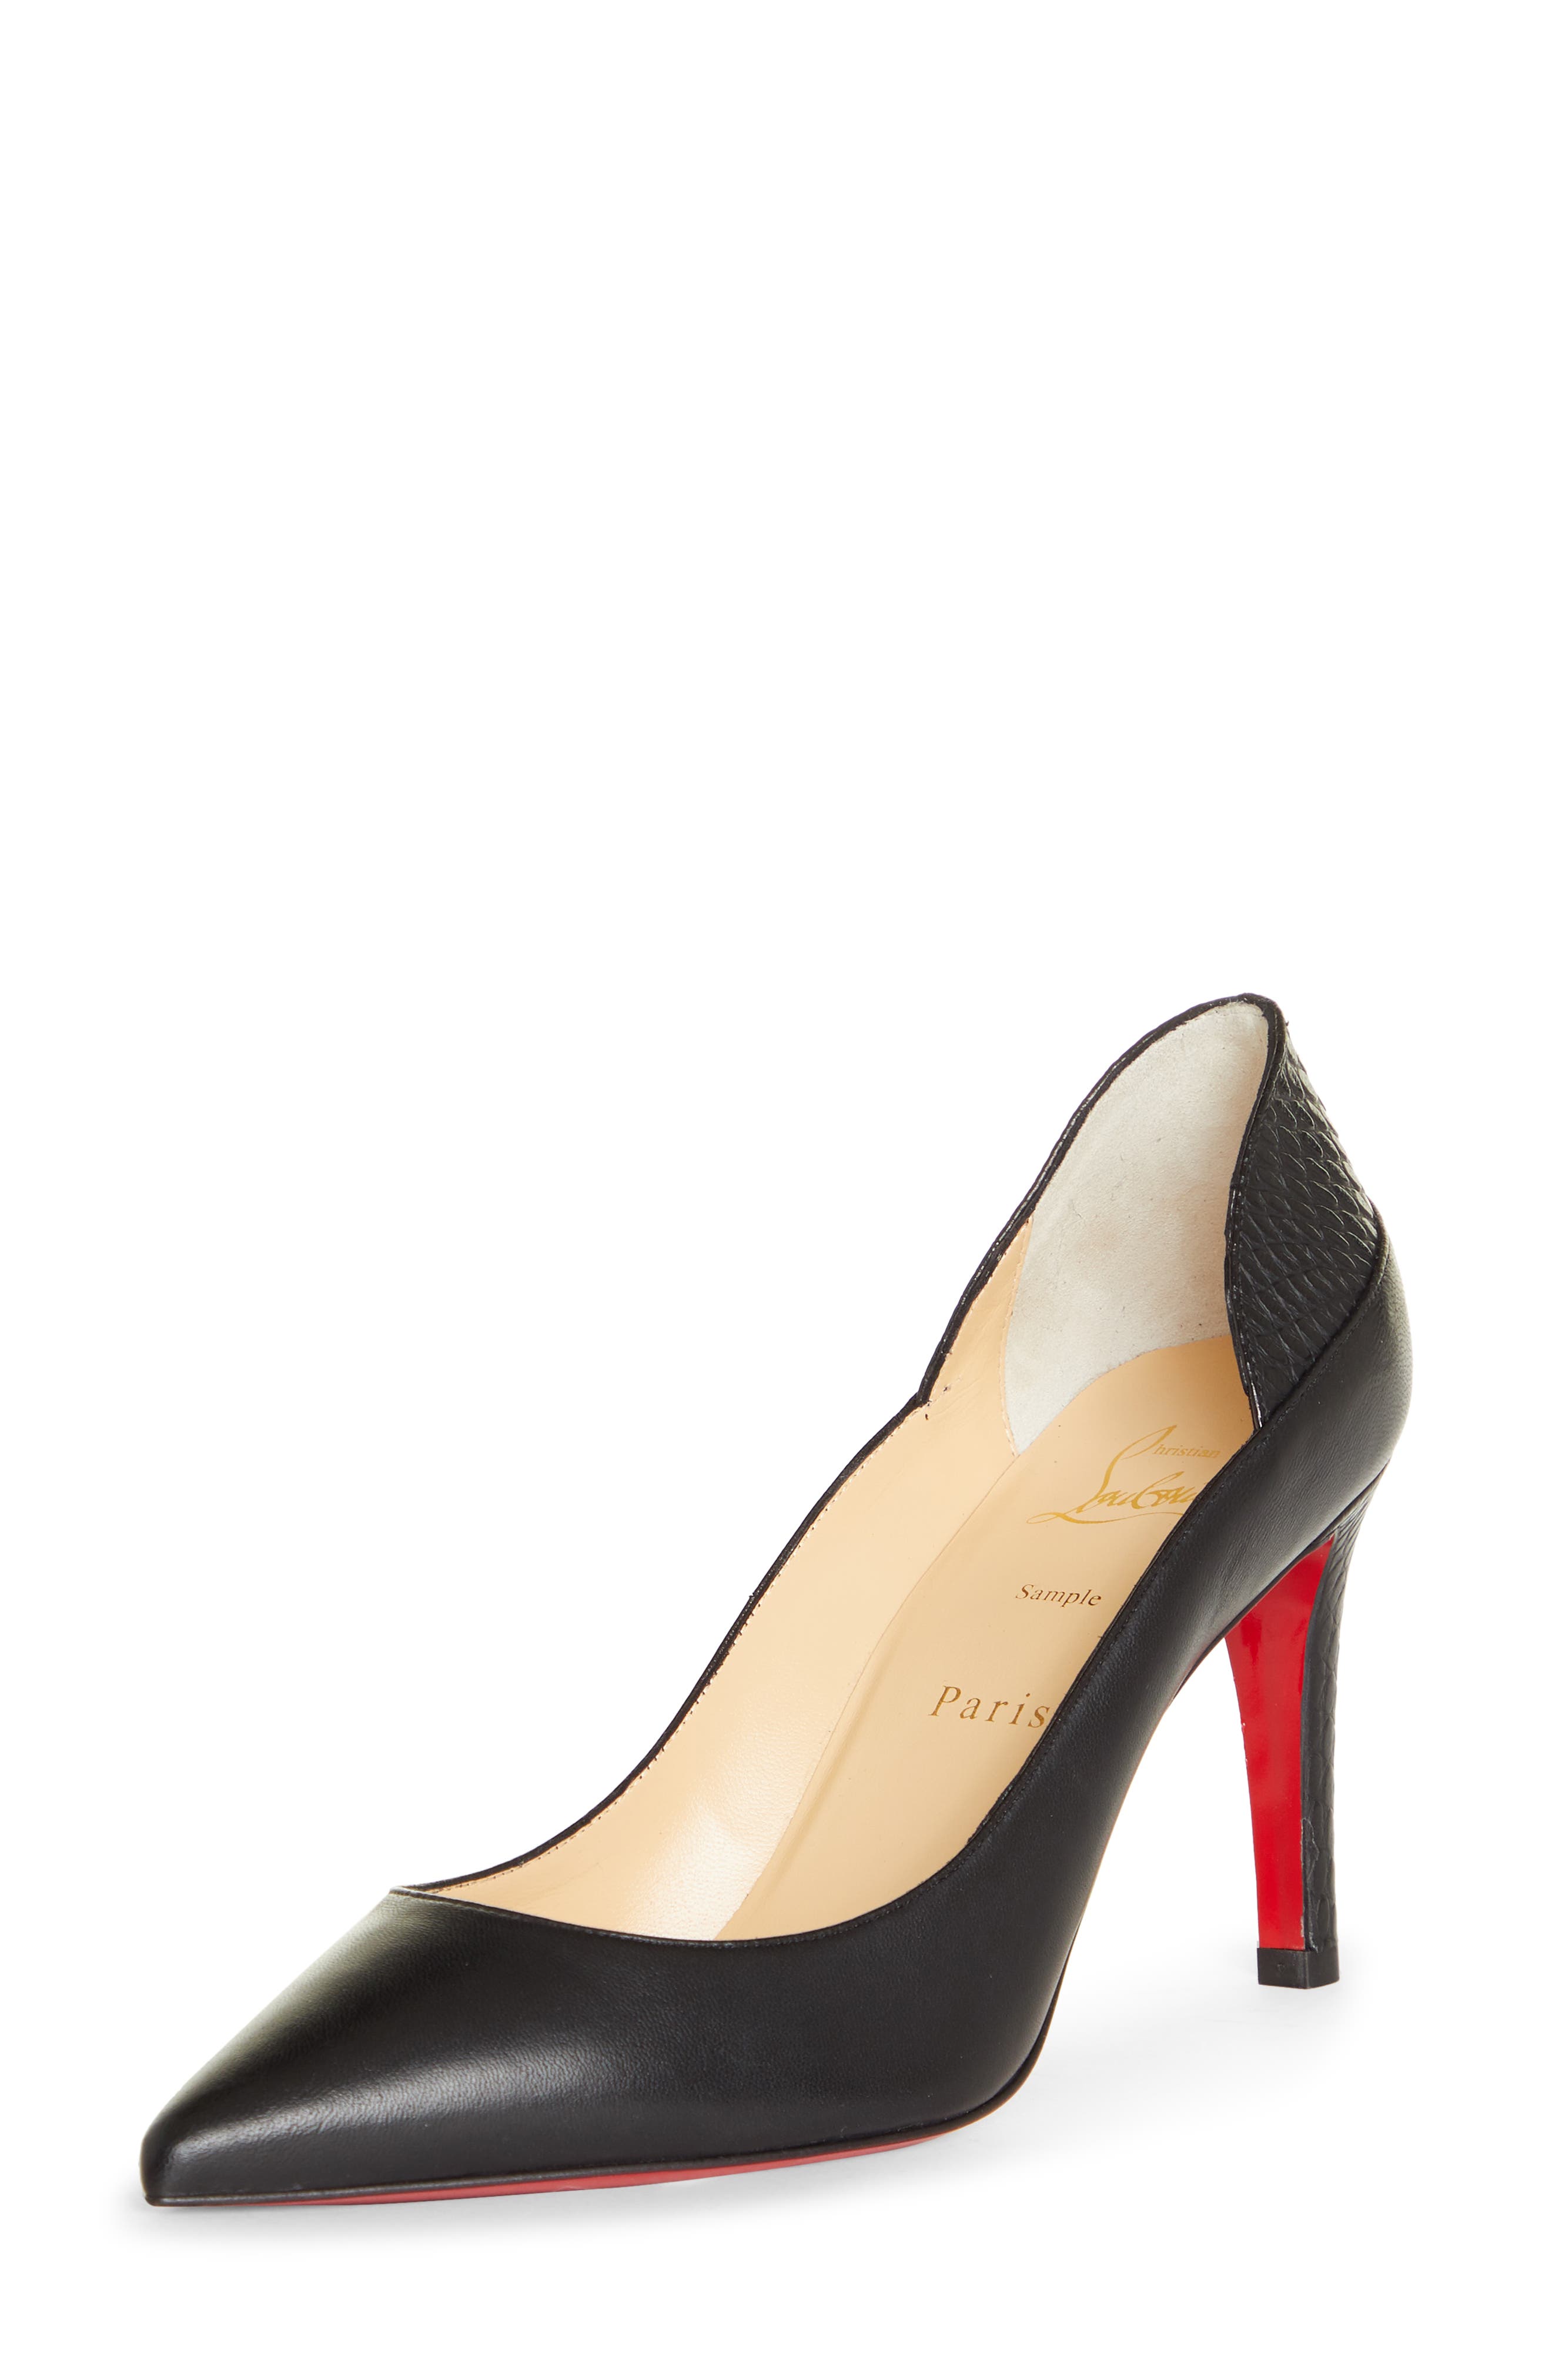 louboutin red bottoms womens